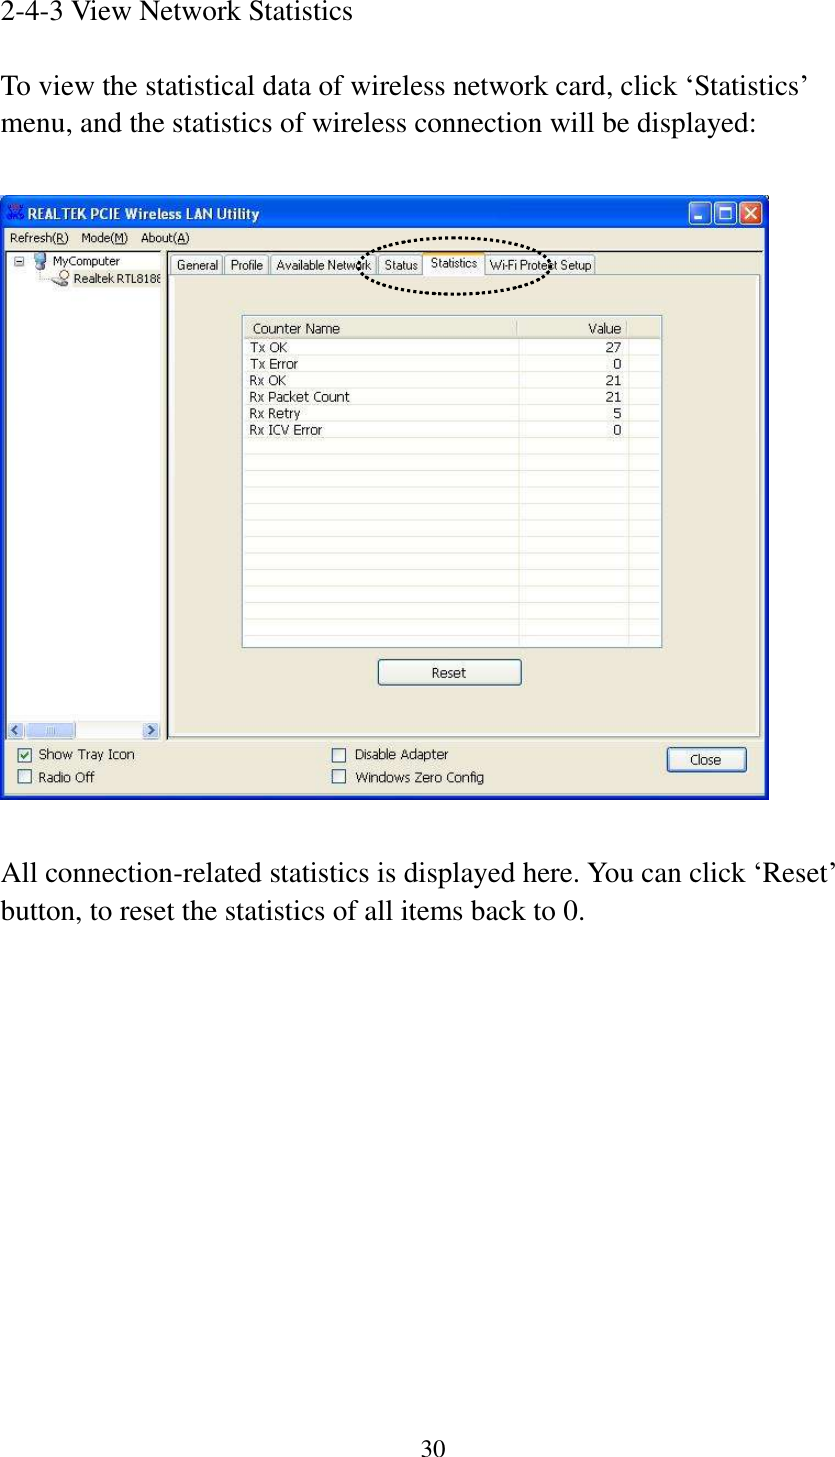 30  2-4-3 View Network Statistics  To view the statistical data of wireless network card, click ‘Statistics’ menu, and the statistics of wireless connection will be displayed:    All connection-related statistics is displayed here. You can click ‘Reset’ button, to reset the statistics of all items back to 0.           